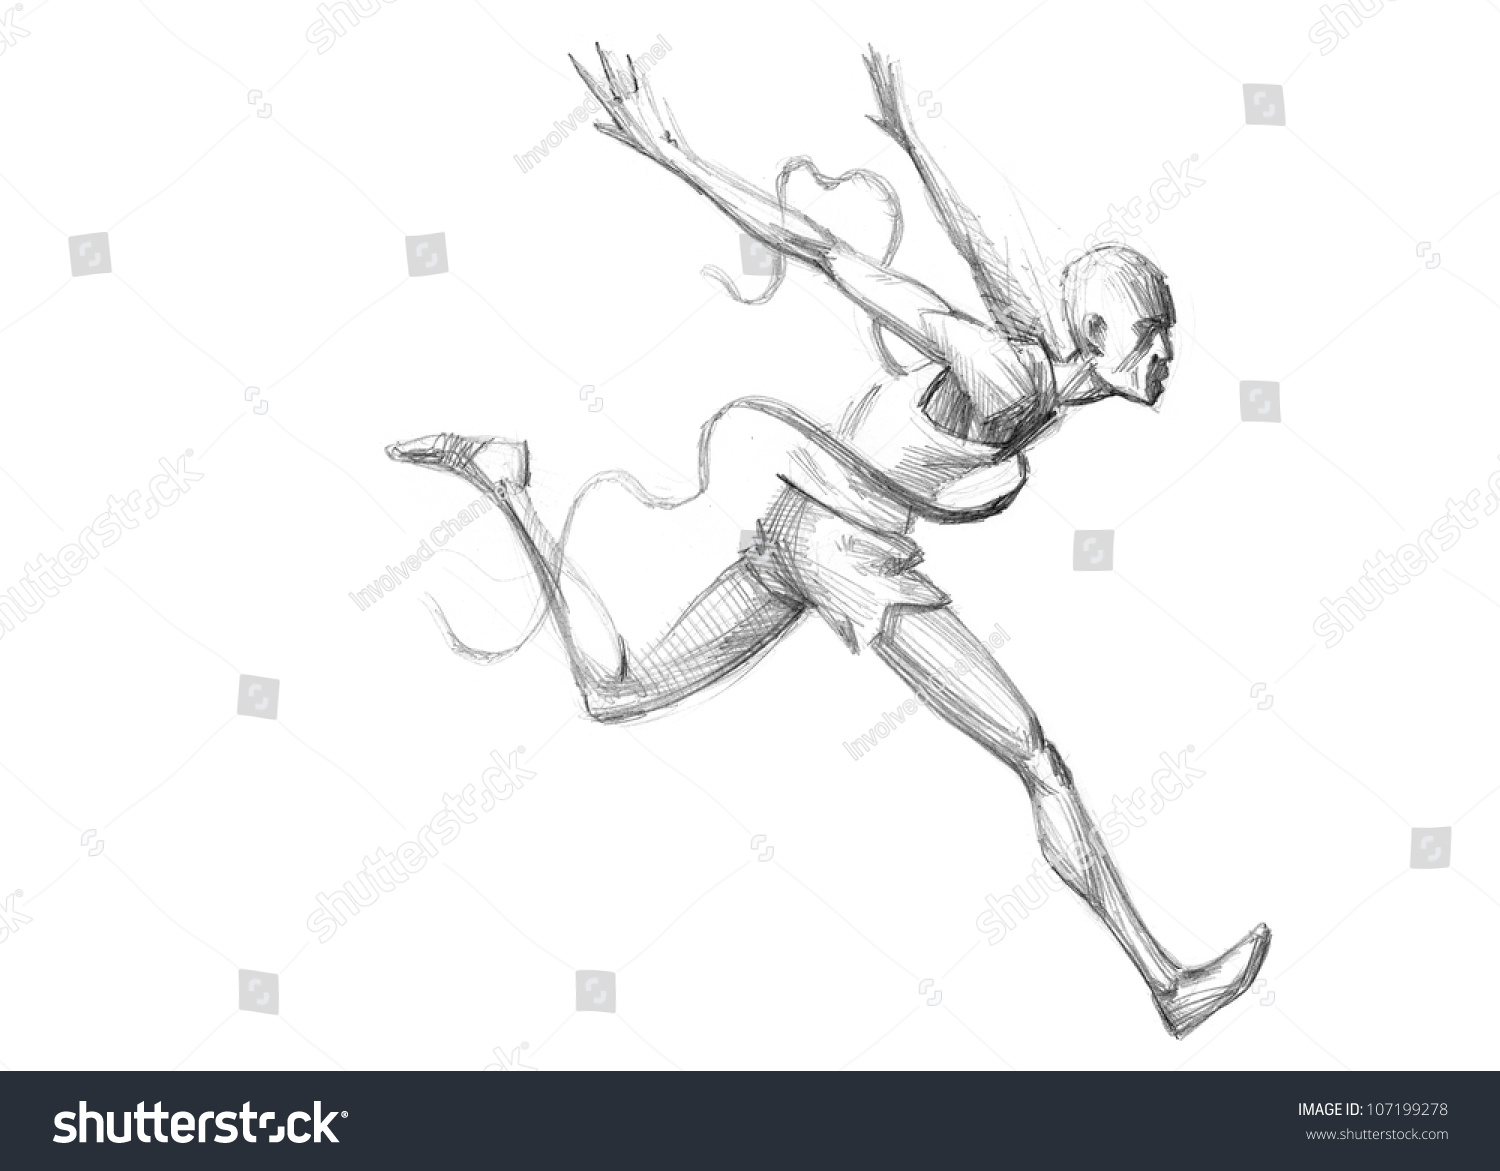 Hand Drawn Sketch Pencil Illustration Olympic Games Athletes Runner